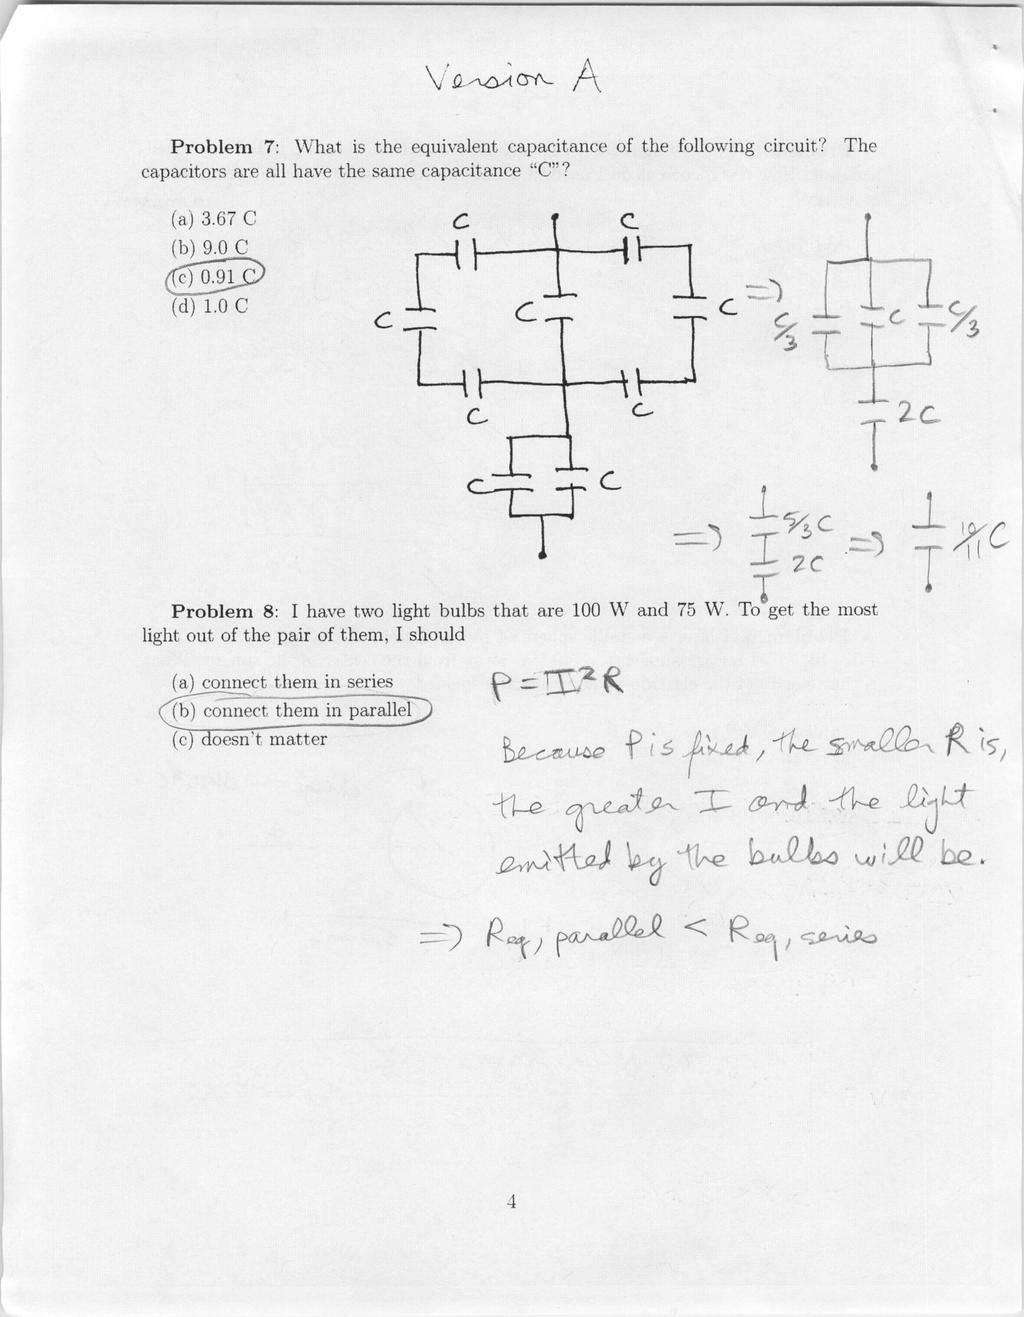 Problem 7: \Vhat is the equivalent capacitance of the following circuit? The capacitors are all have the same capacitance "C"? (a) 3.67 C C c.. (b) 9.0 C cr ) (d)1.0c C. C L J X.3 C, c.